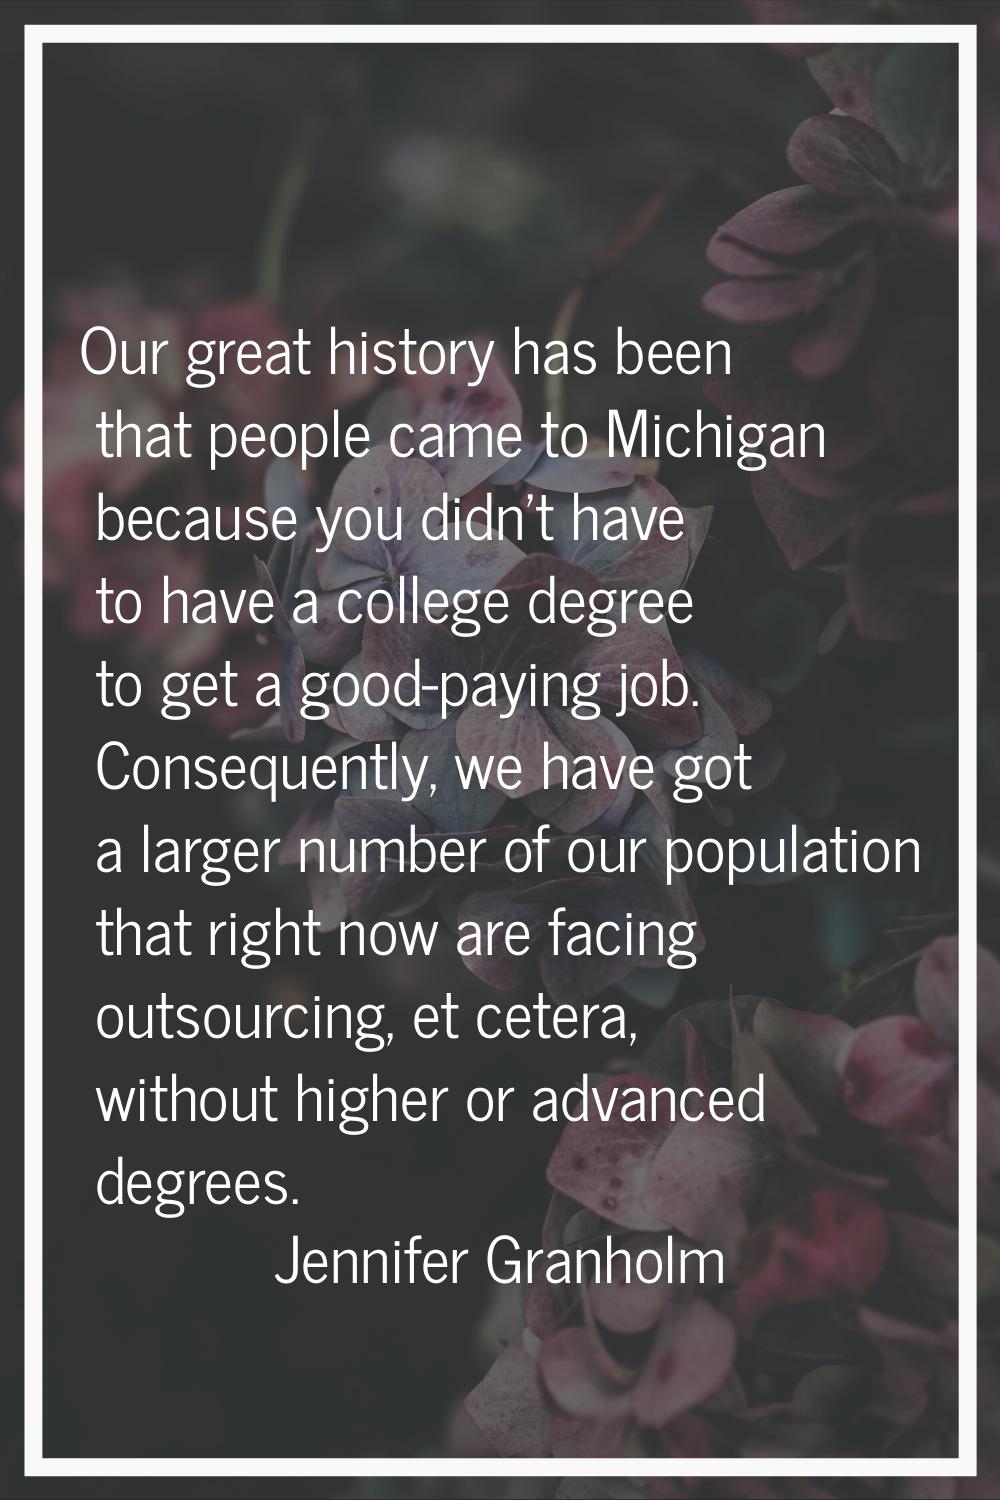 Our great history has been that people came to Michigan because you didn't have to have a college d